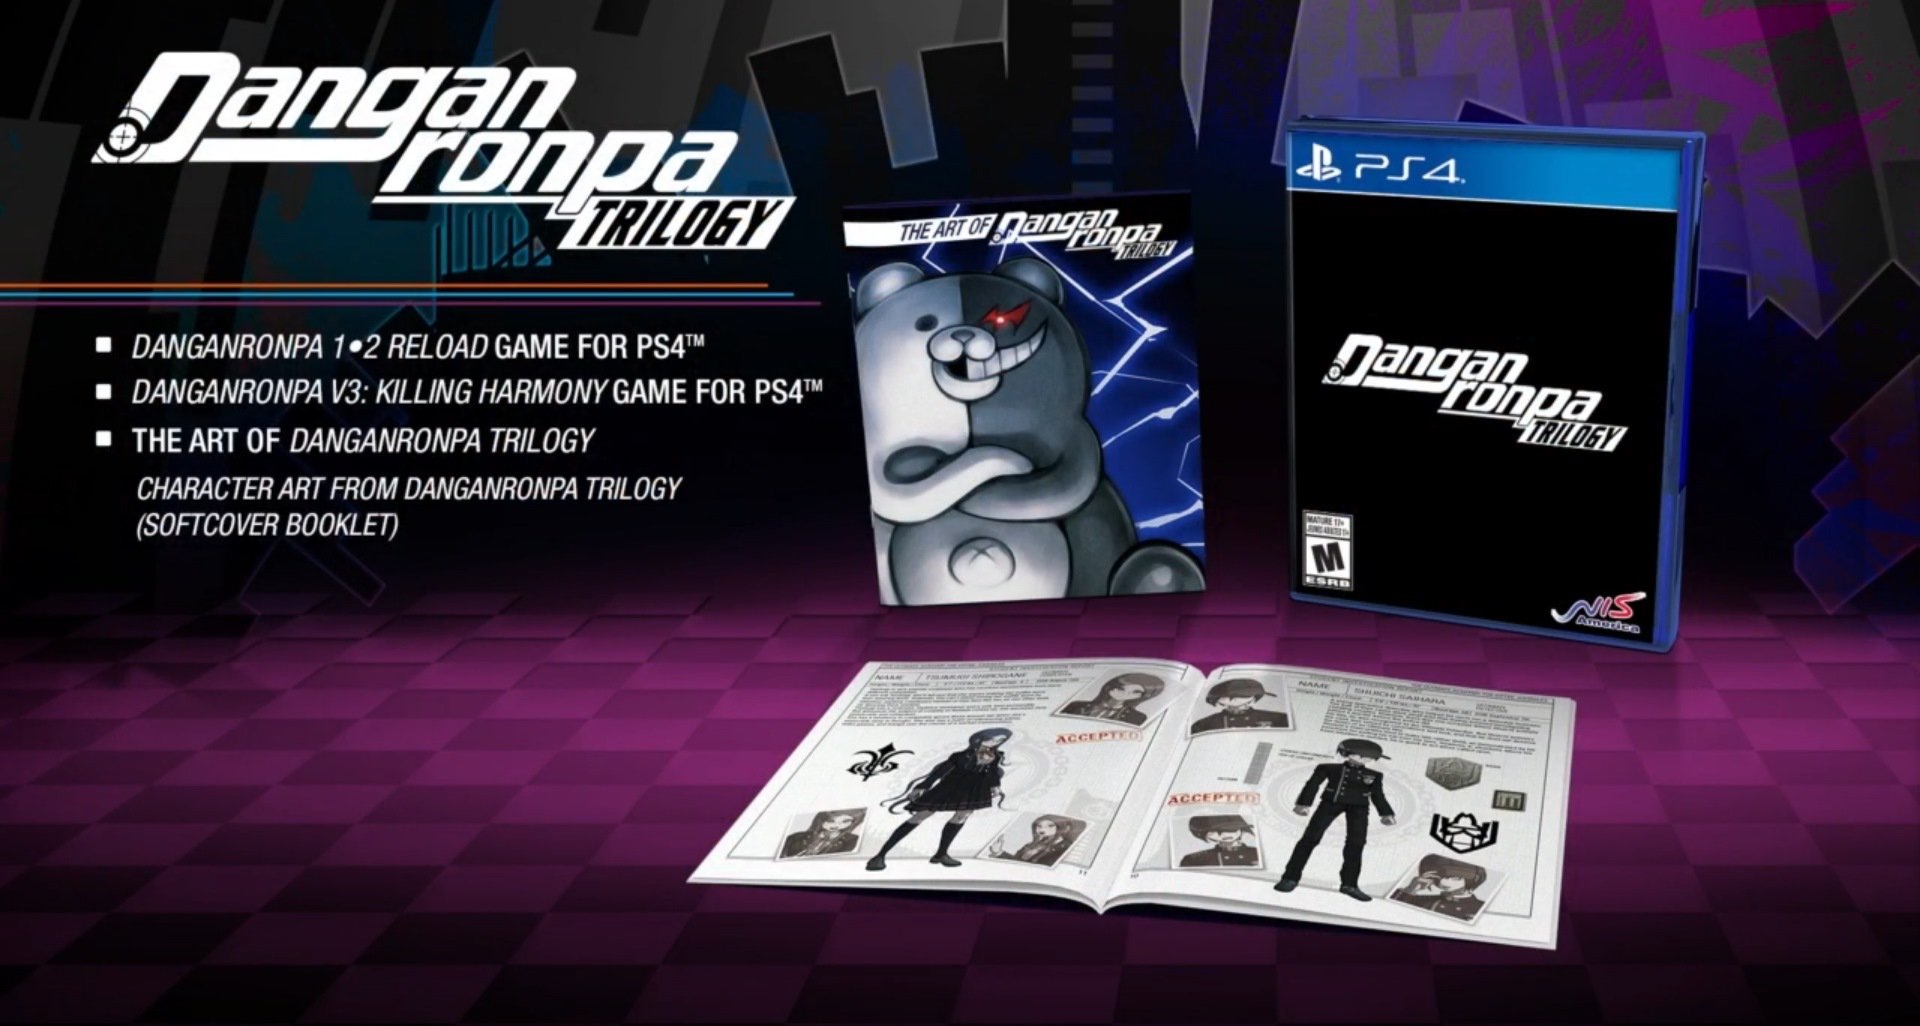 Danganronpa Trilogy Announced for PS4, Set for 2019 Release